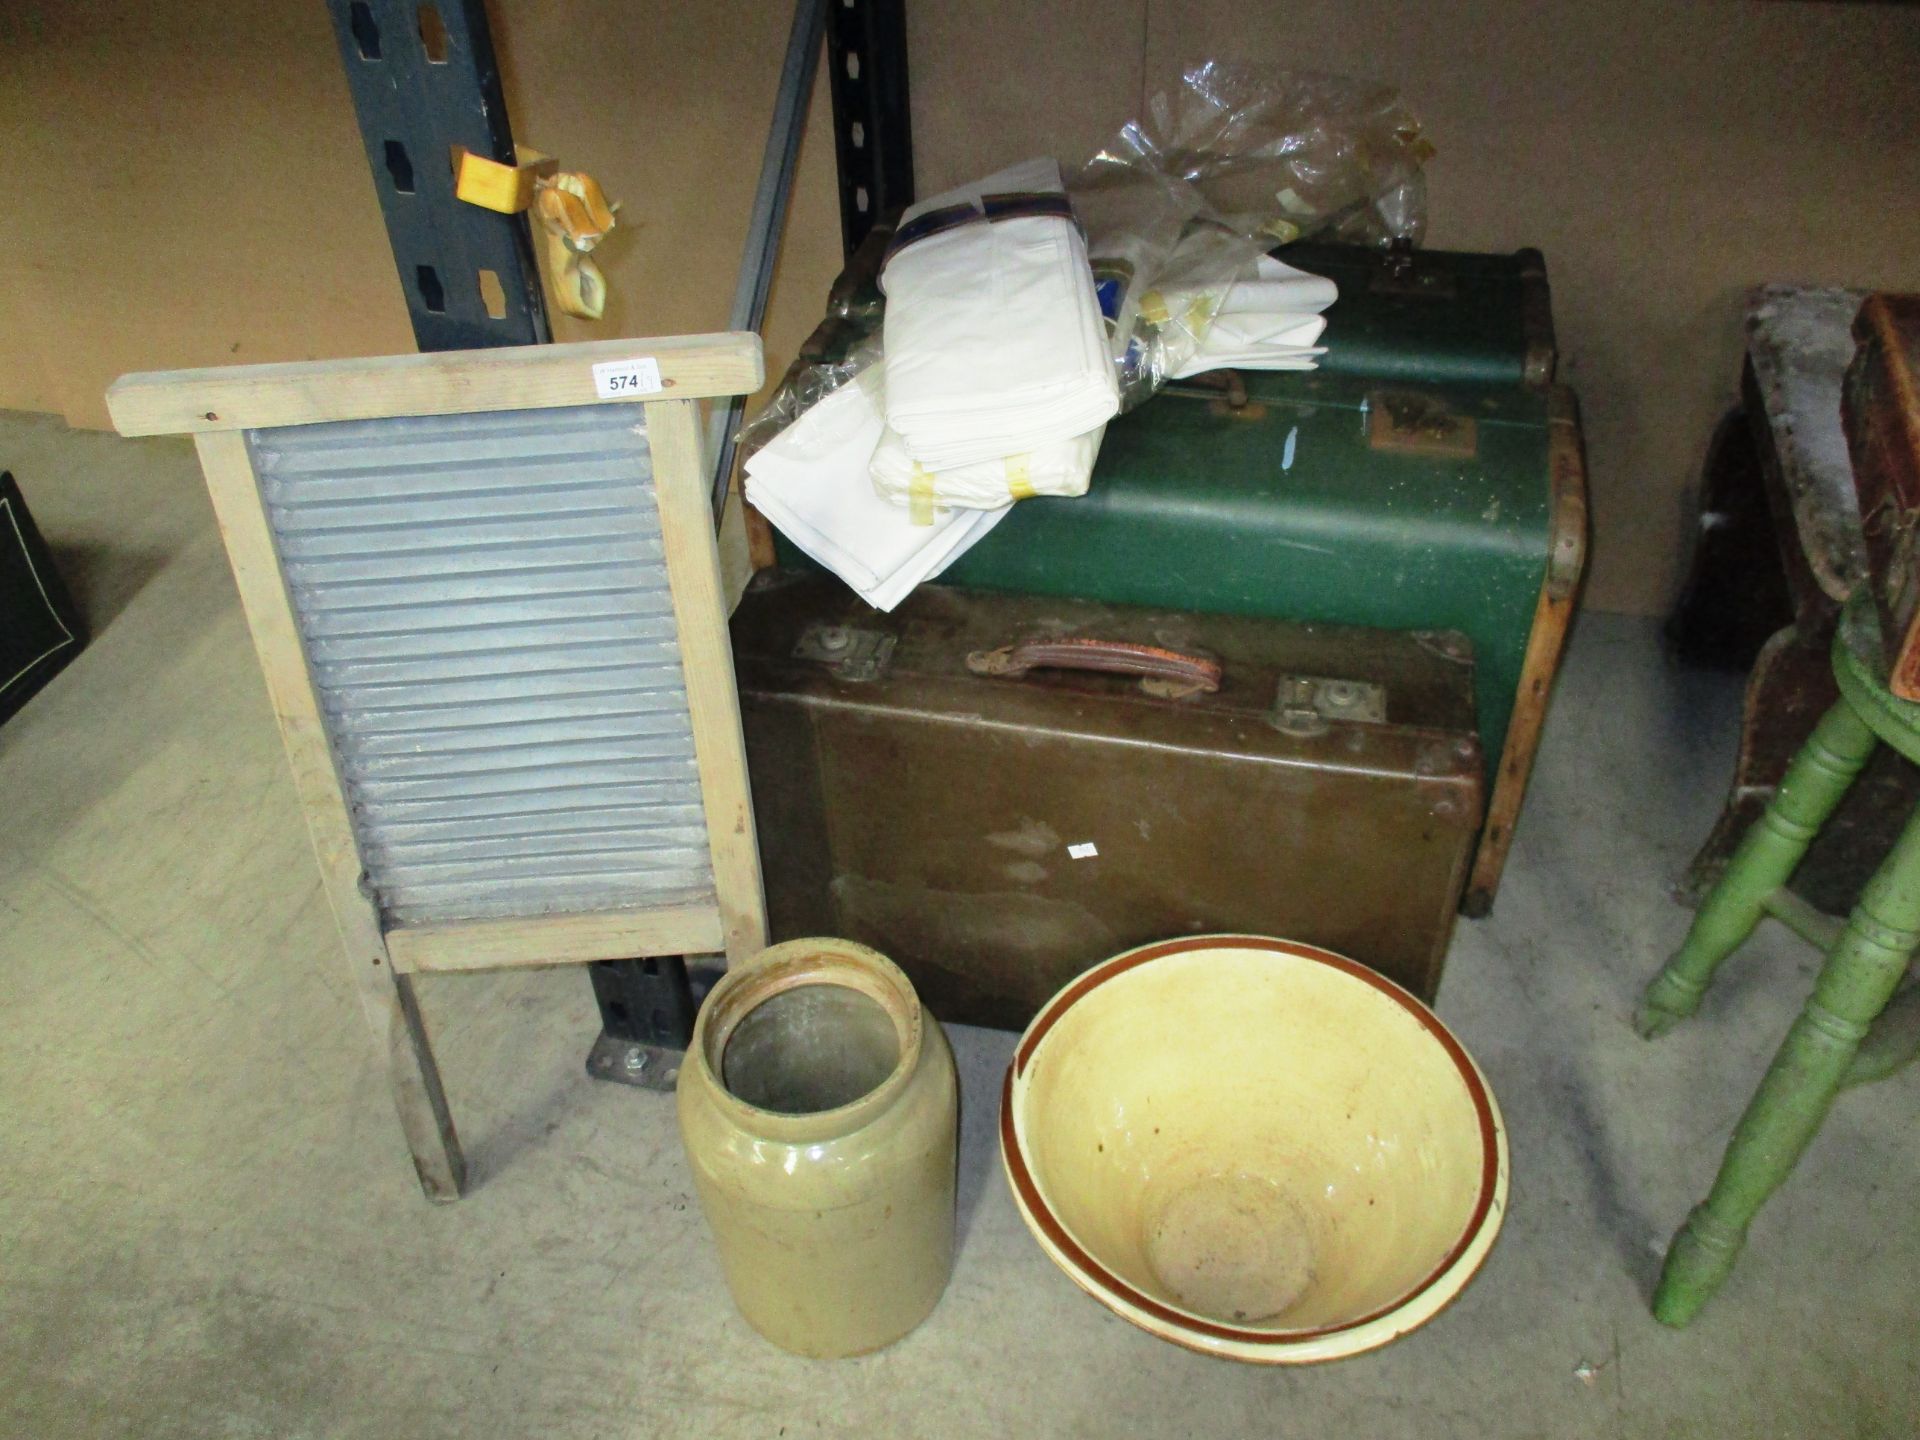 Nine items - 2 green suitcases, brown suitcase, washboard, mixing bowl,